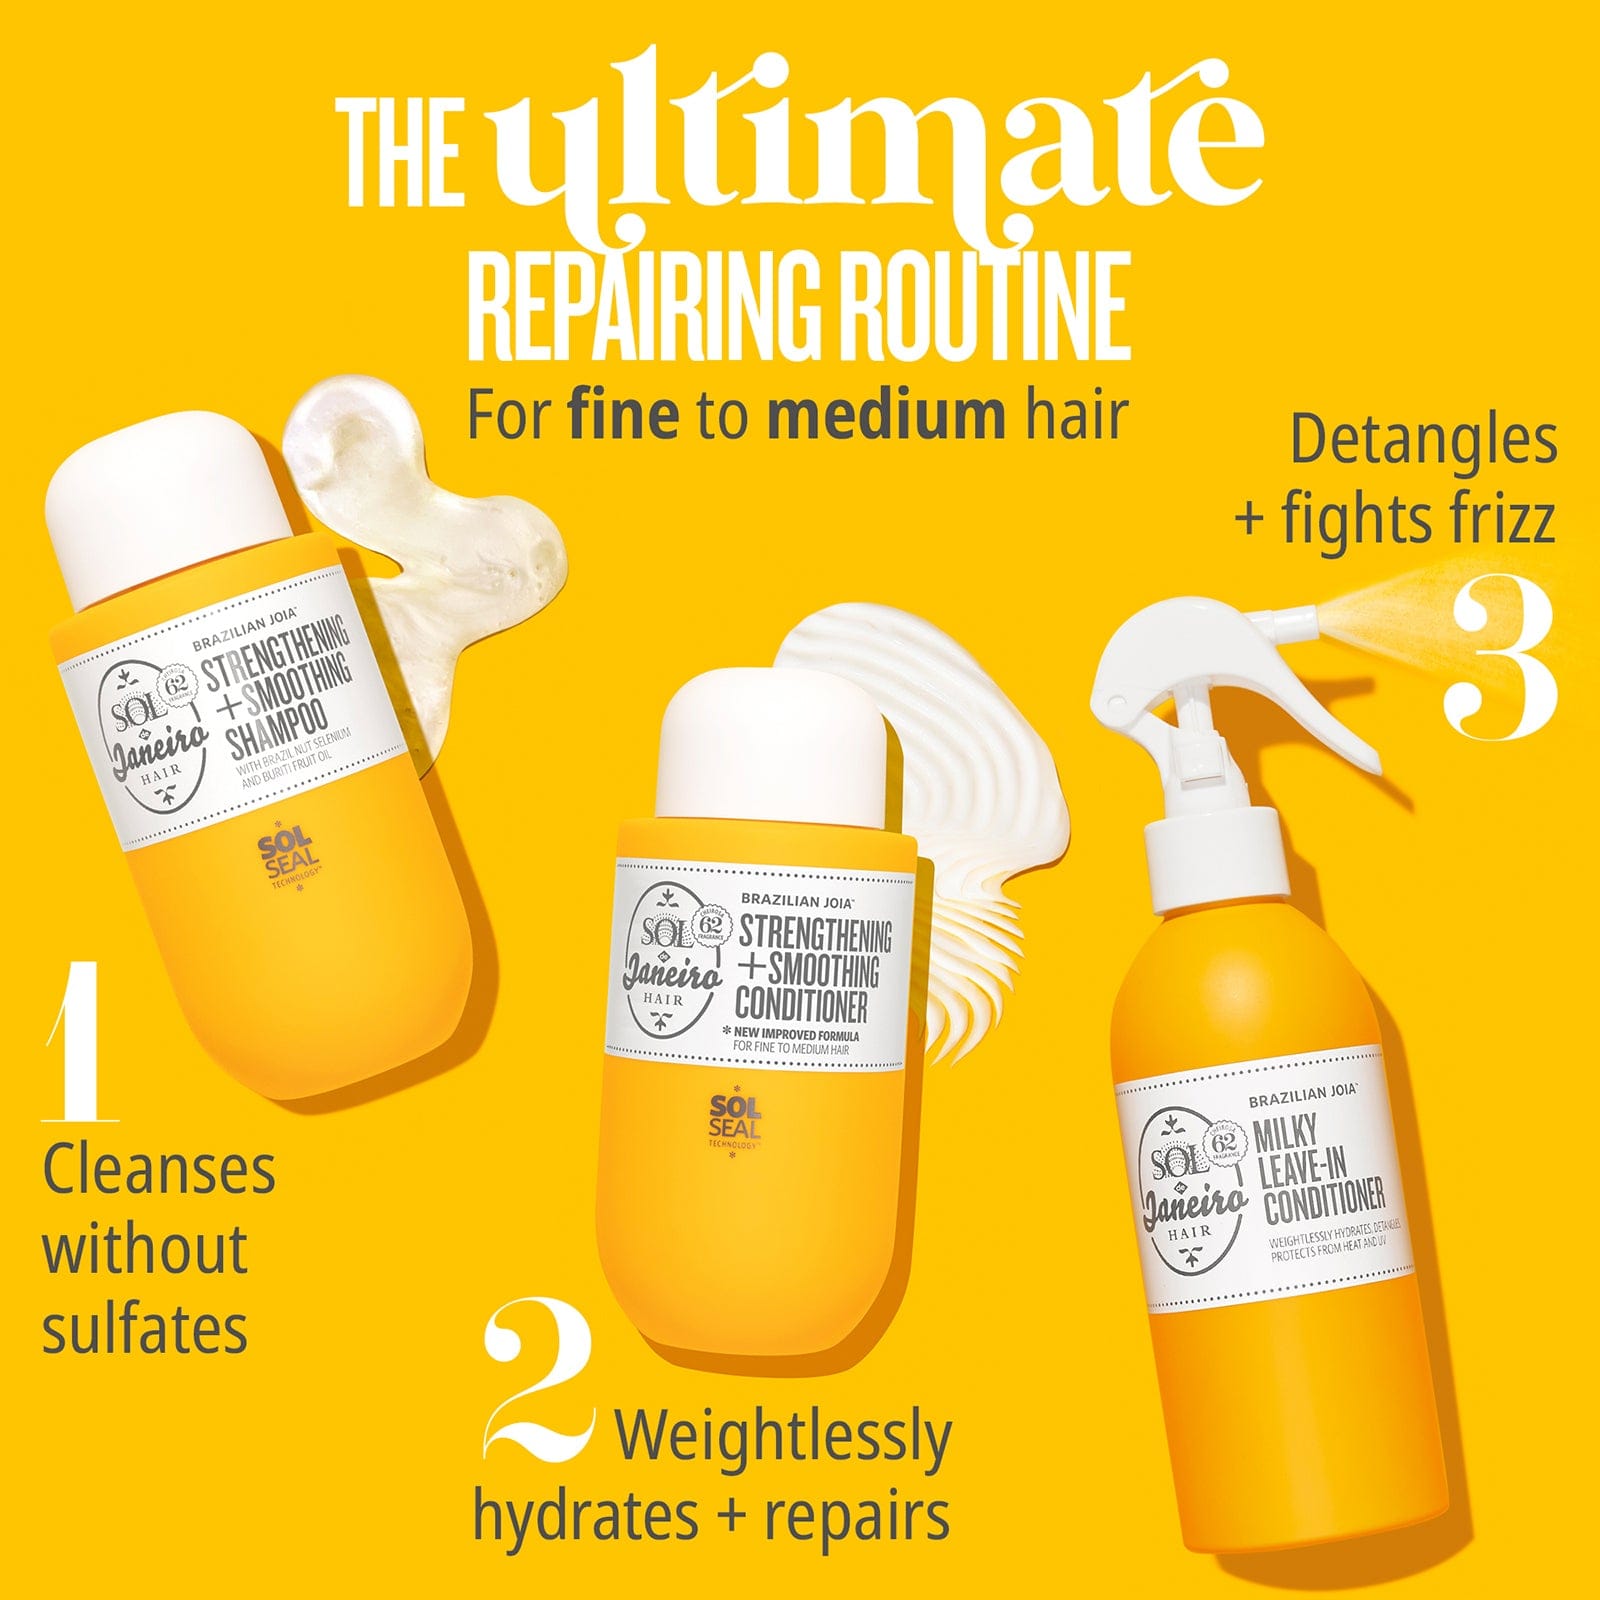 The ultimate repairing Routine for fine to medium hair | 1. Shampoo cleanses without sulfates | 2.  Conditioner weightlessly hydrates and repairs | 3. leave in conditioner detangles and fights frizz